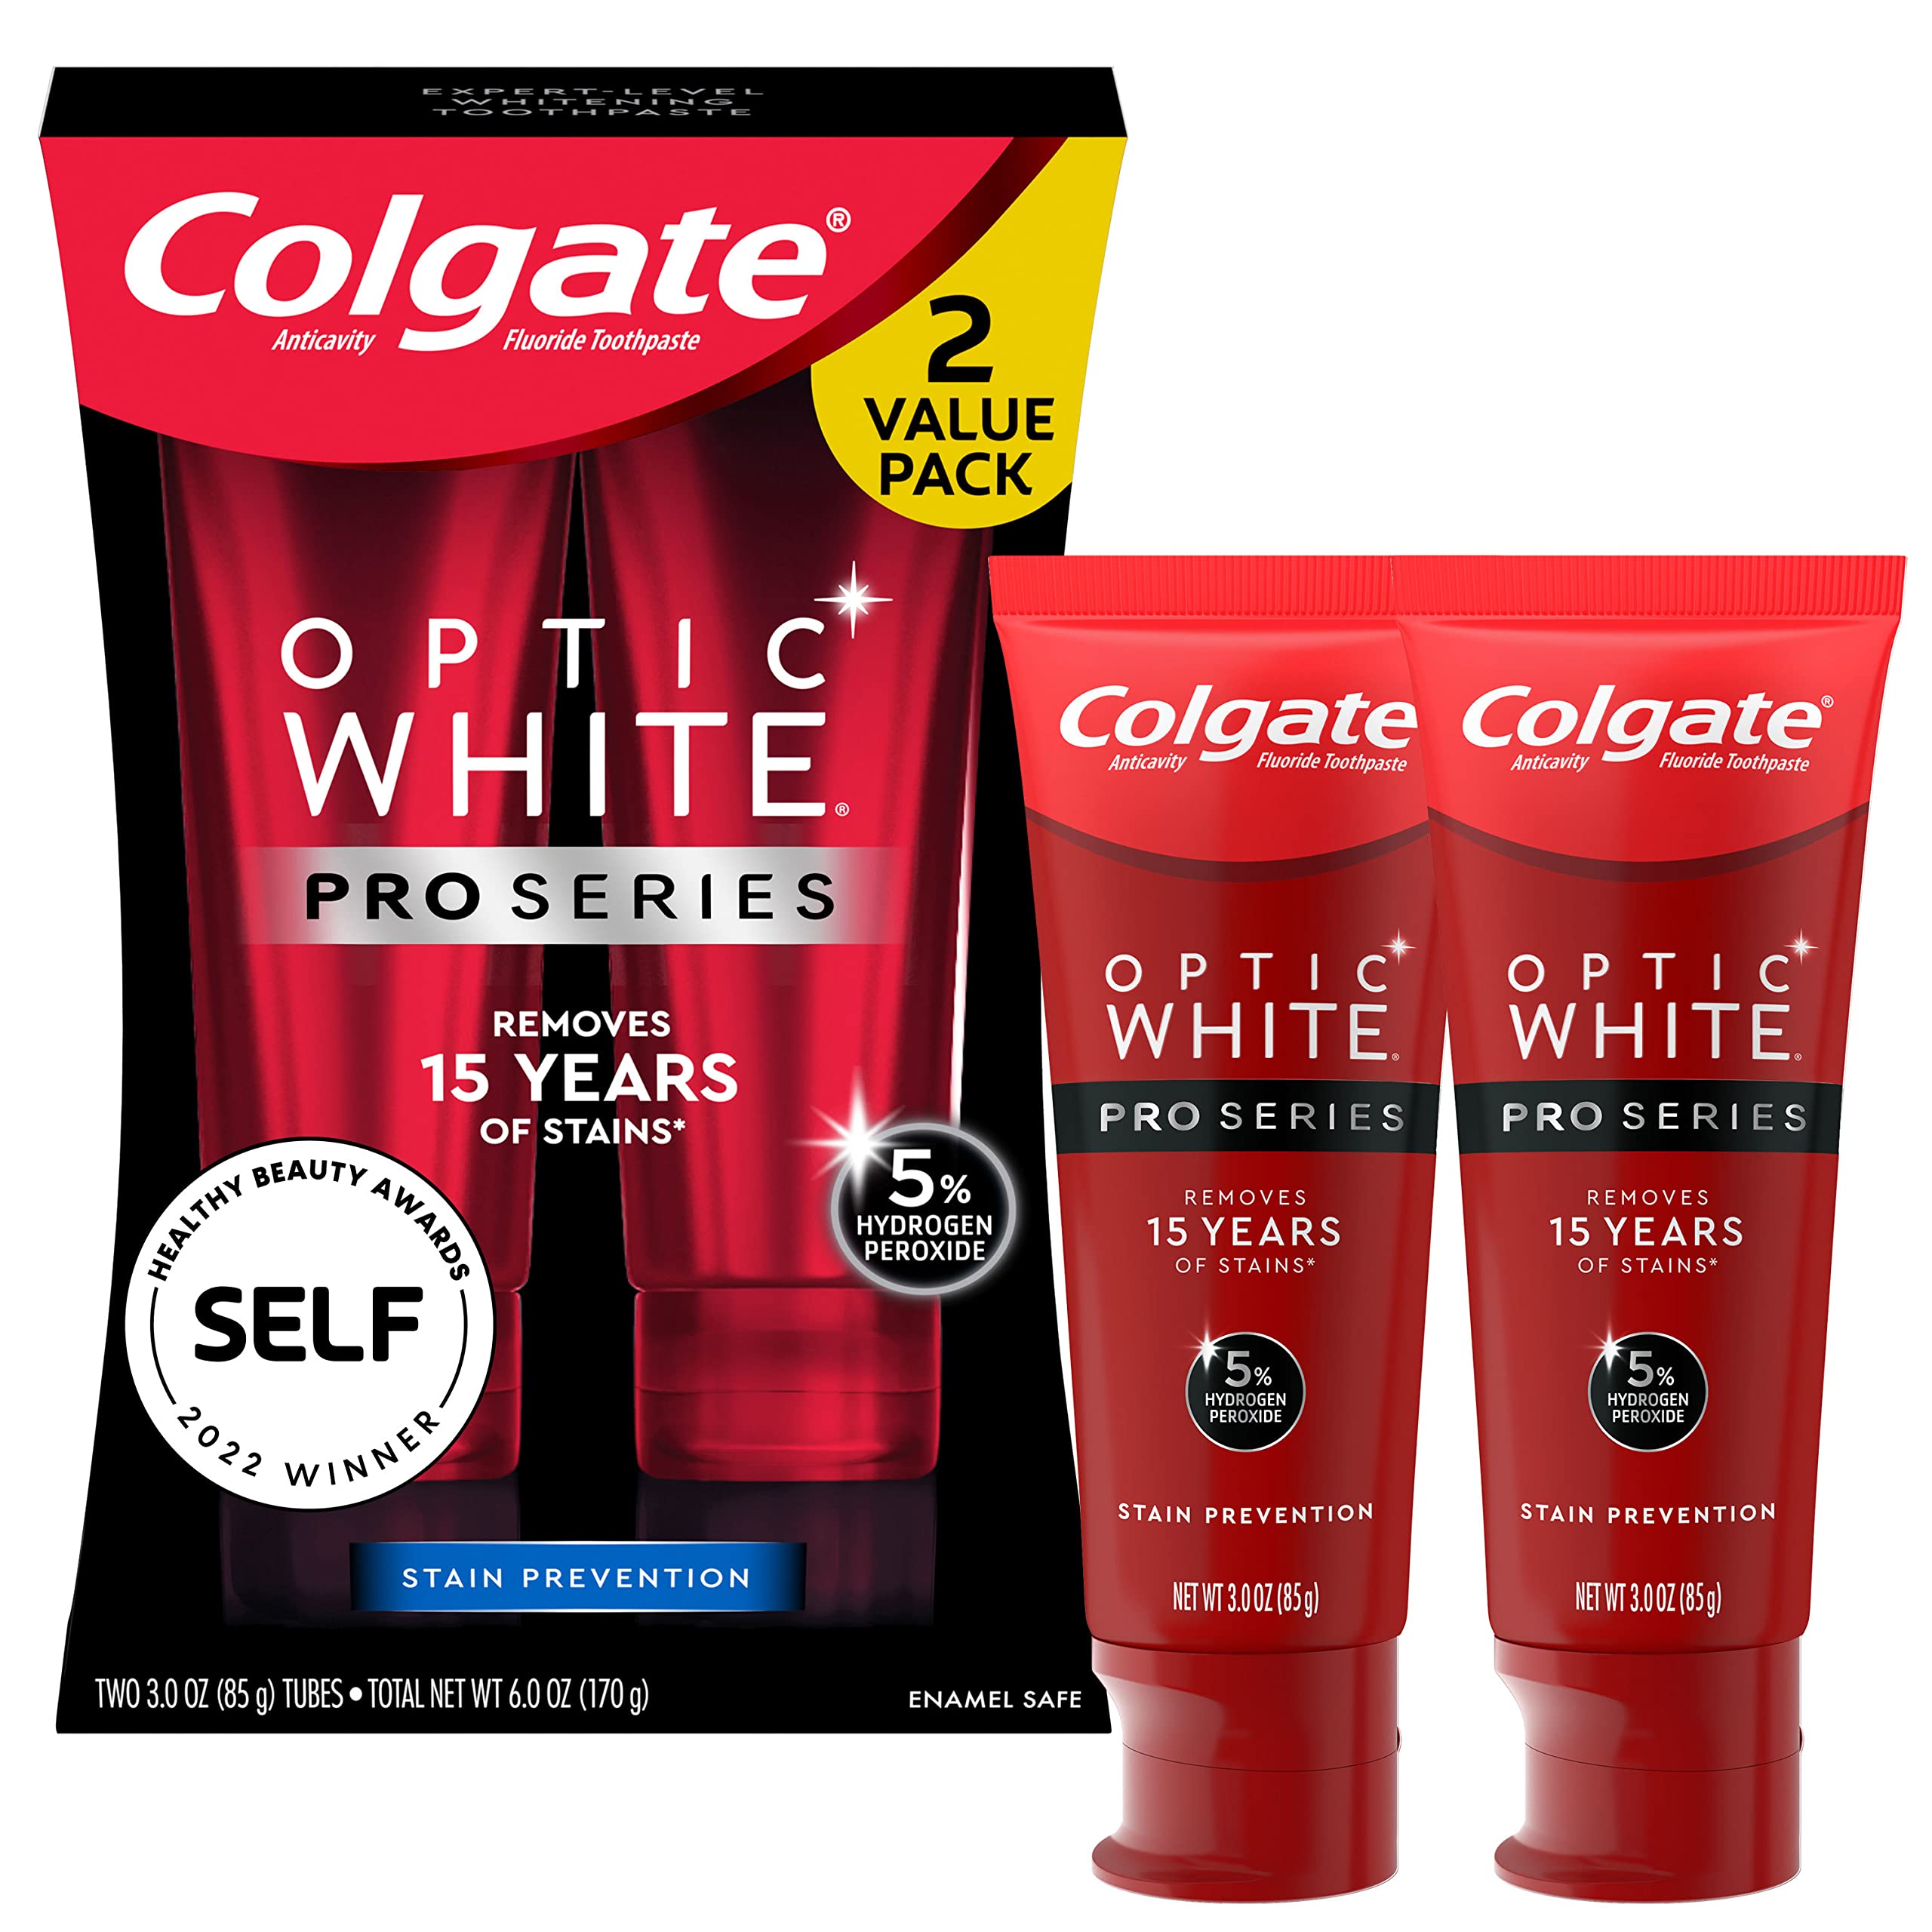 Colgate Optic White Pro Series Whitening Toothpaste with 5% Hydrogen Peroxide, Stain Prevention, 3 oz Tube, 2 Pack